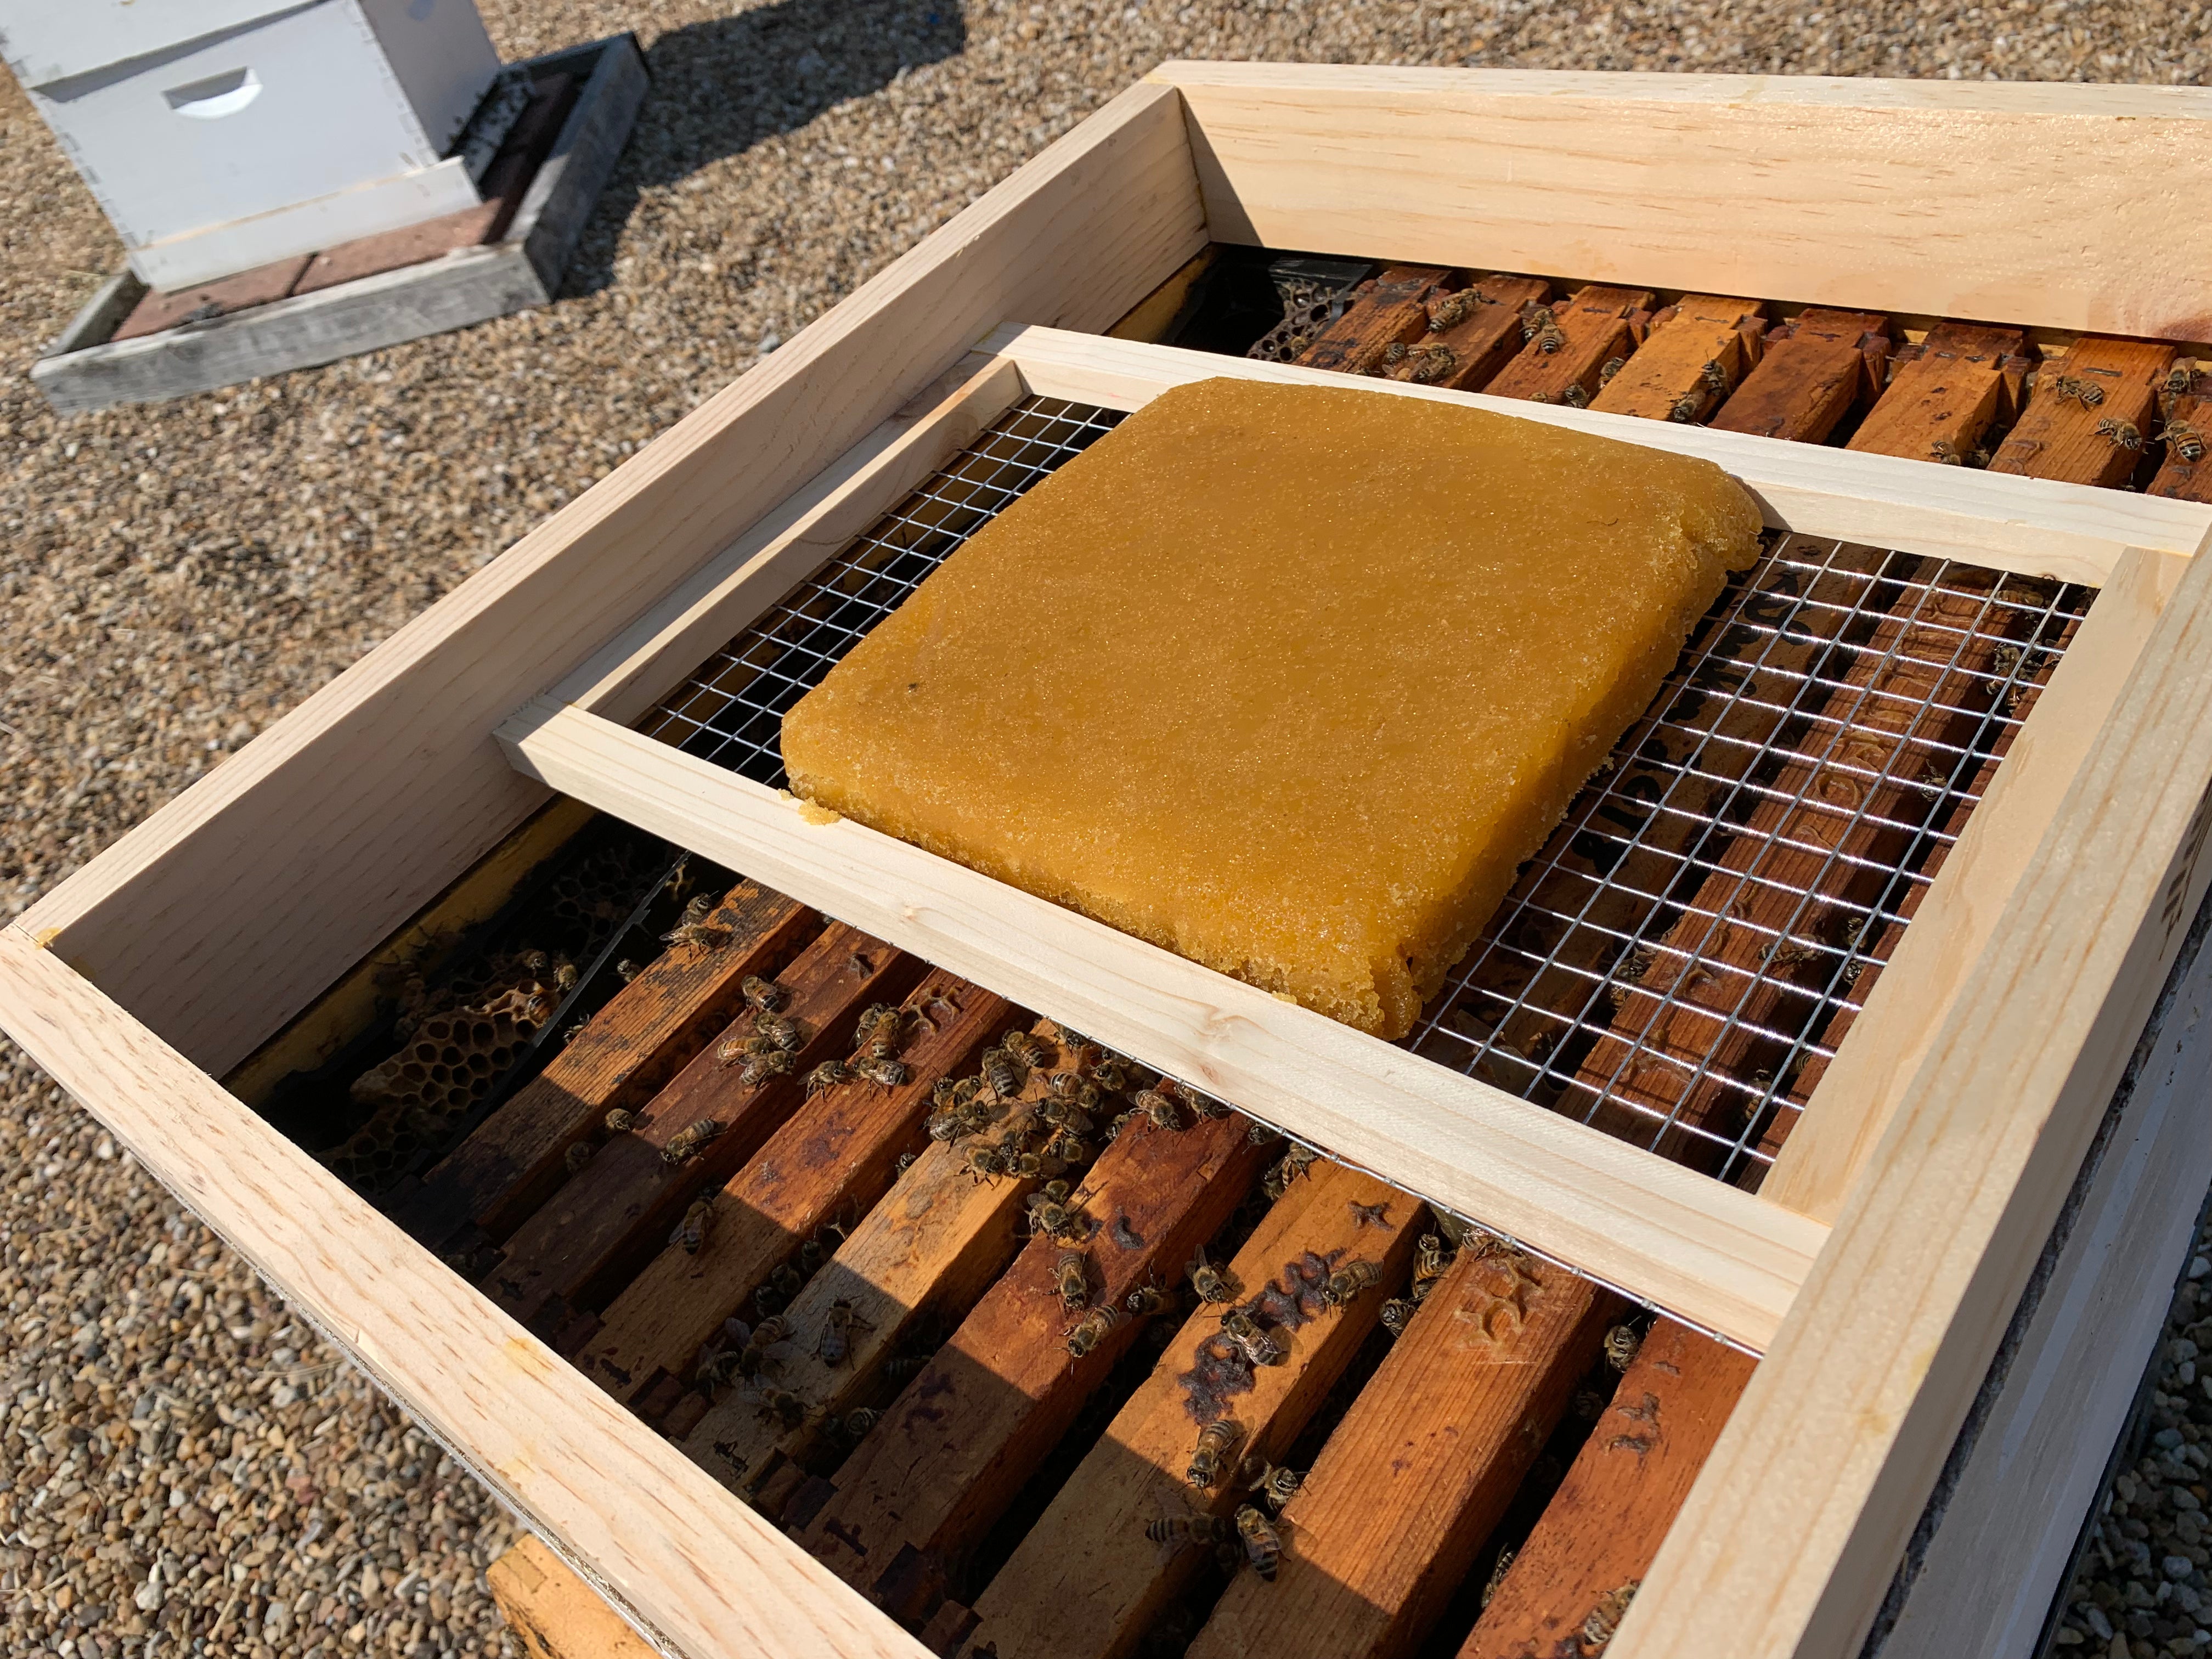 Sugar Brick and Patty Tray Feeder for 10 Frame Hive